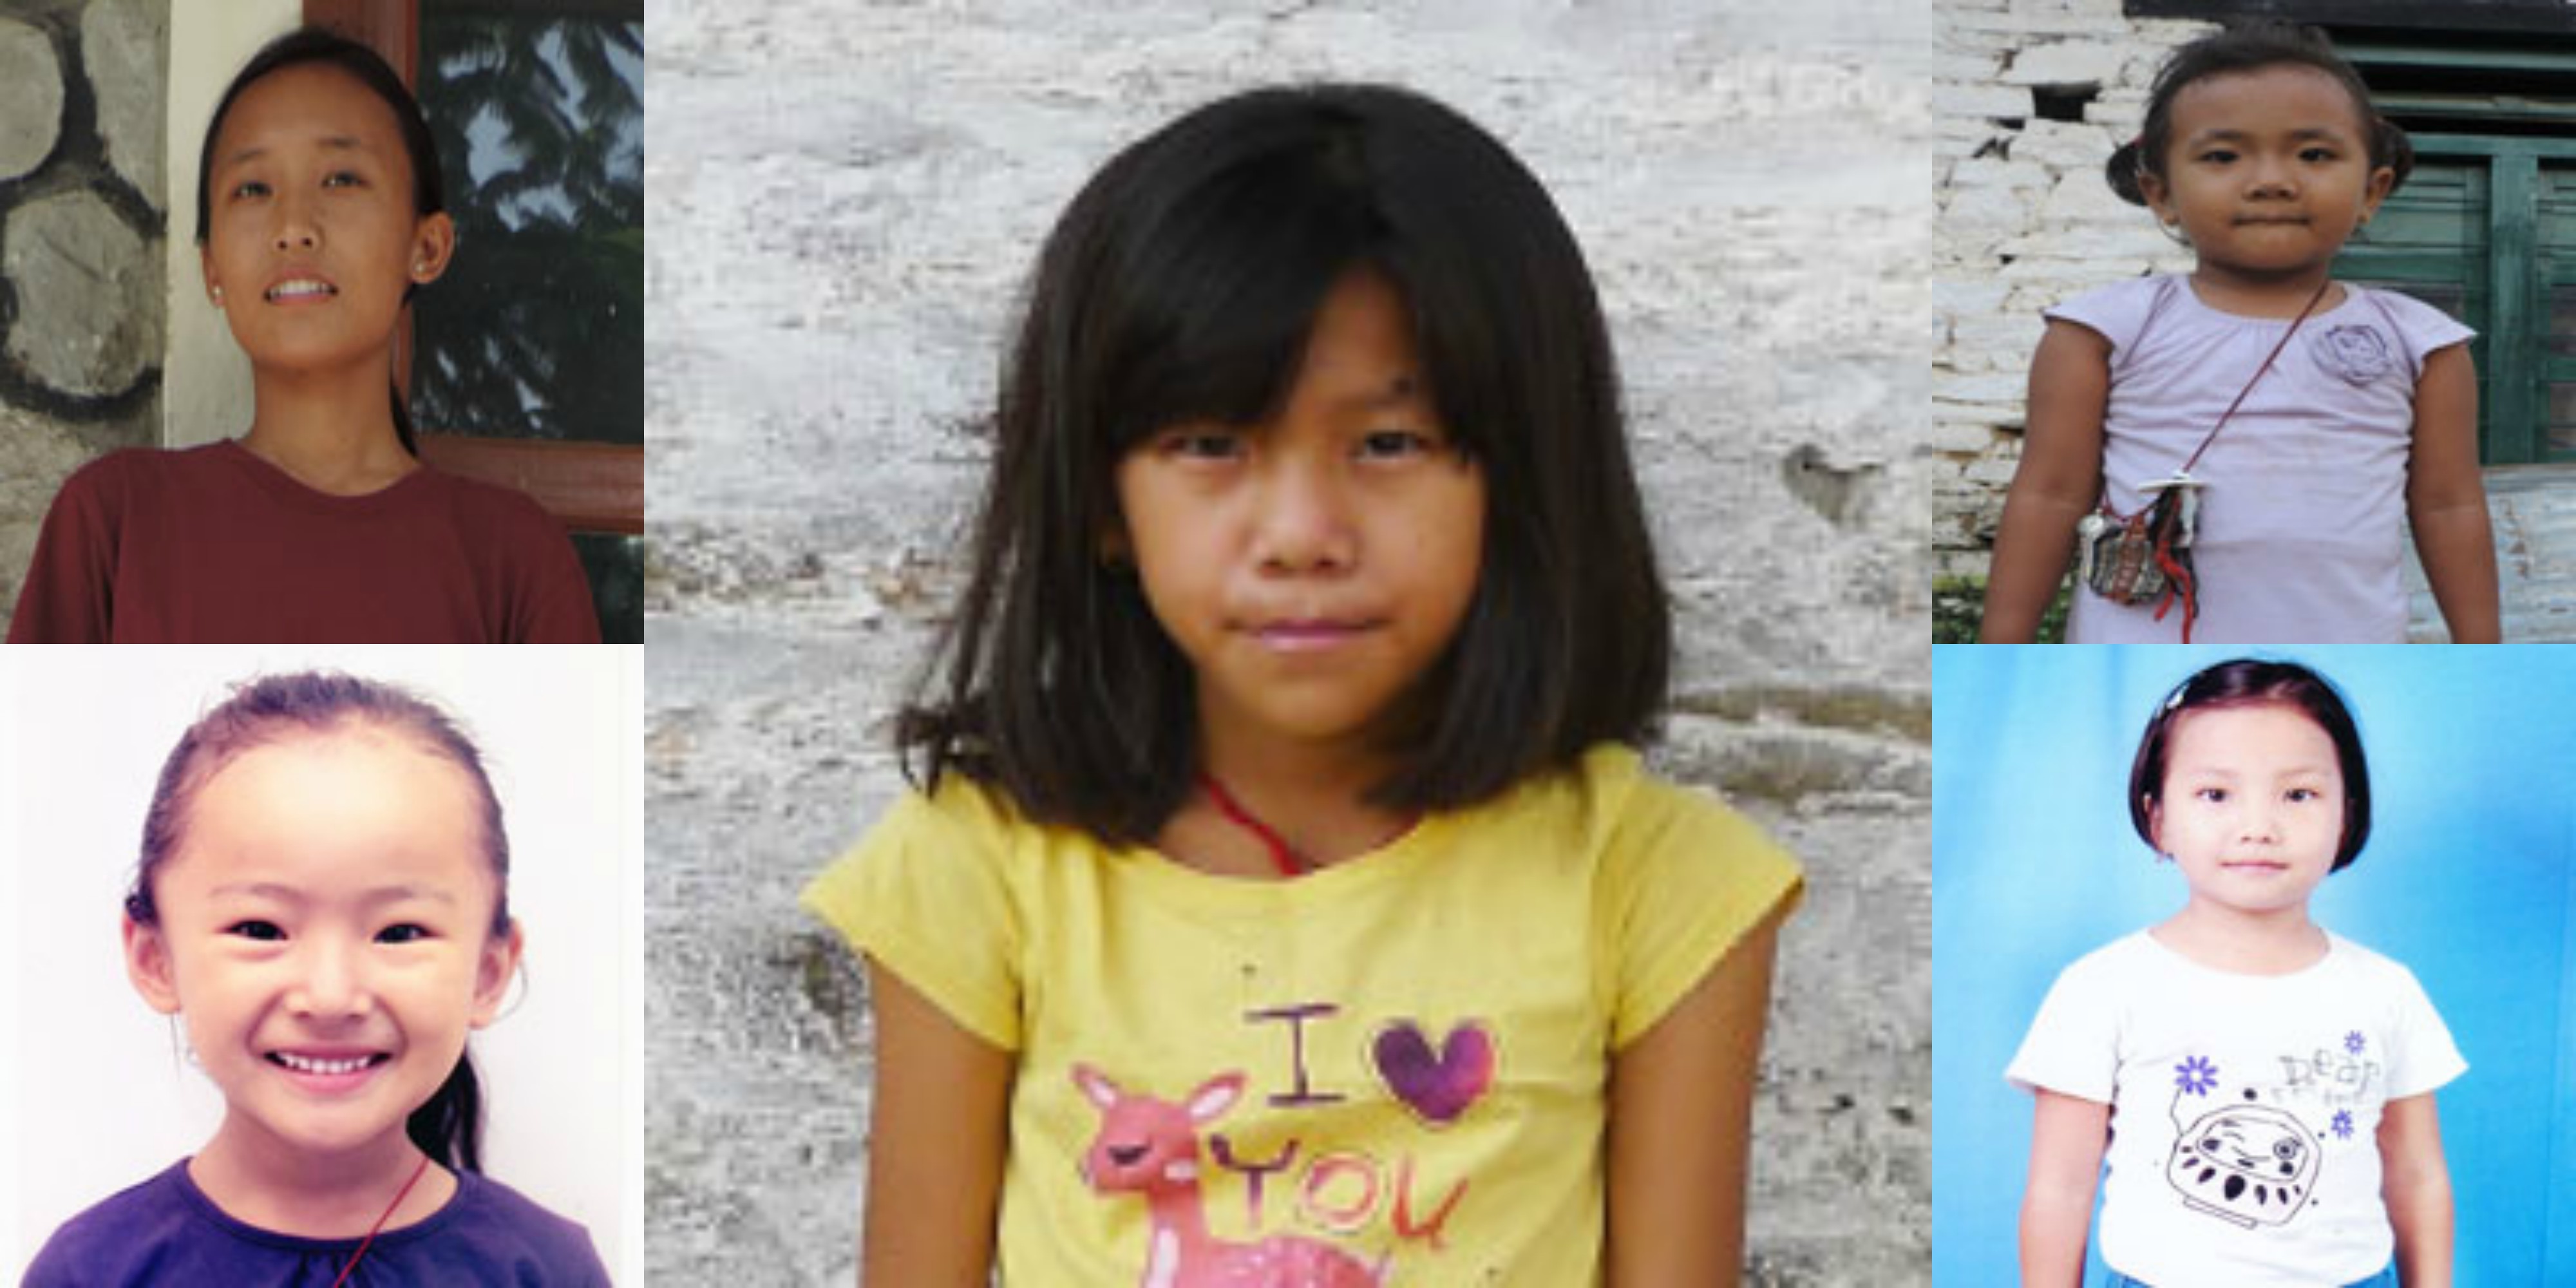 Can you help these Tibetan girls with life changing sponsorship?